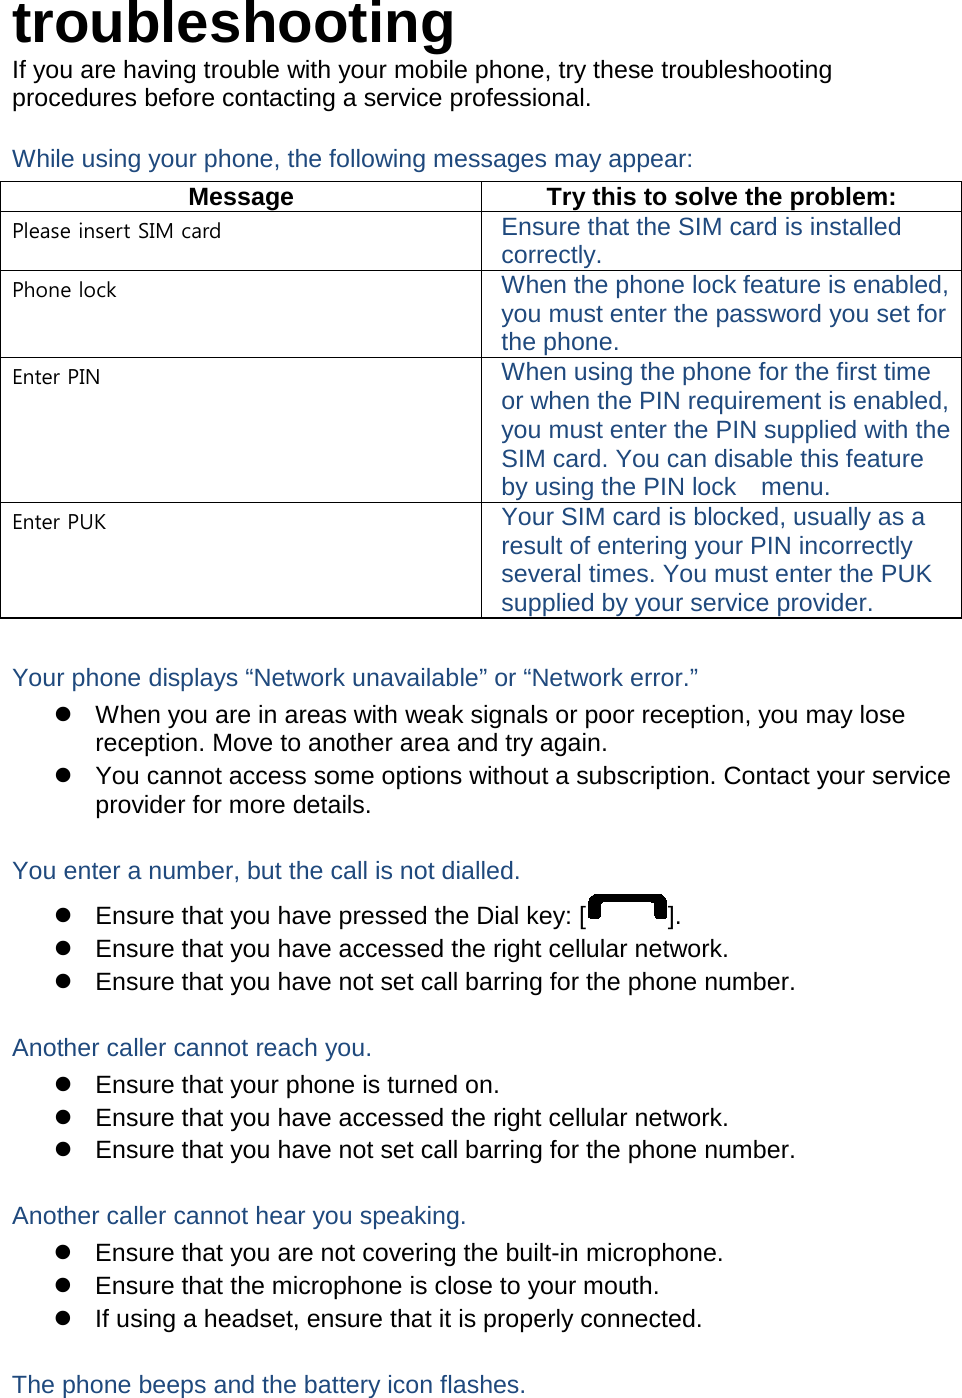 troubleshooting If you are having trouble with your mobile phone, try these troubleshooting procedures before contacting a service professional. While using your phone, the following messages may appear: Message Try this to solve the problem: Please insert SIM card Ensure that the SIM card is installed correctly. Phone lock When the phone lock feature is enabled, you must enter the password you set for the phone. Enter PIN When using the phone for the first time or when the PIN requirement is enabled, you must enter the PIN supplied with the SIM card. You can disable this feature by using the PIN lock   menu. Enter PUK Your SIM card is blocked, usually as a result of entering your PIN incorrectly several times. You must enter the PUK supplied by your service provider.    Your phone displays “Network unavailable” or “Network error.”  When you are in areas with weak signals or poor reception, you may lose reception. Move to another area and try again.  You cannot access some options without a subscription. Contact your service provider for more details.  You enter a number, but the call is not dialled.  Ensure that you have pressed the Dial key: [ ].  Ensure that you have accessed the right cellular network.  Ensure that you have not set call barring for the phone number.  Another caller cannot reach you.  Ensure that your phone is turned on.  Ensure that you have accessed the right cellular network.  Ensure that you have not set call barring for the phone number.  Another caller cannot hear you speaking.  Ensure that you are not covering the built-in microphone.  Ensure that the microphone is close to your mouth.  If using a headset, ensure that it is properly connected.  The phone beeps and the battery icon flashes. 